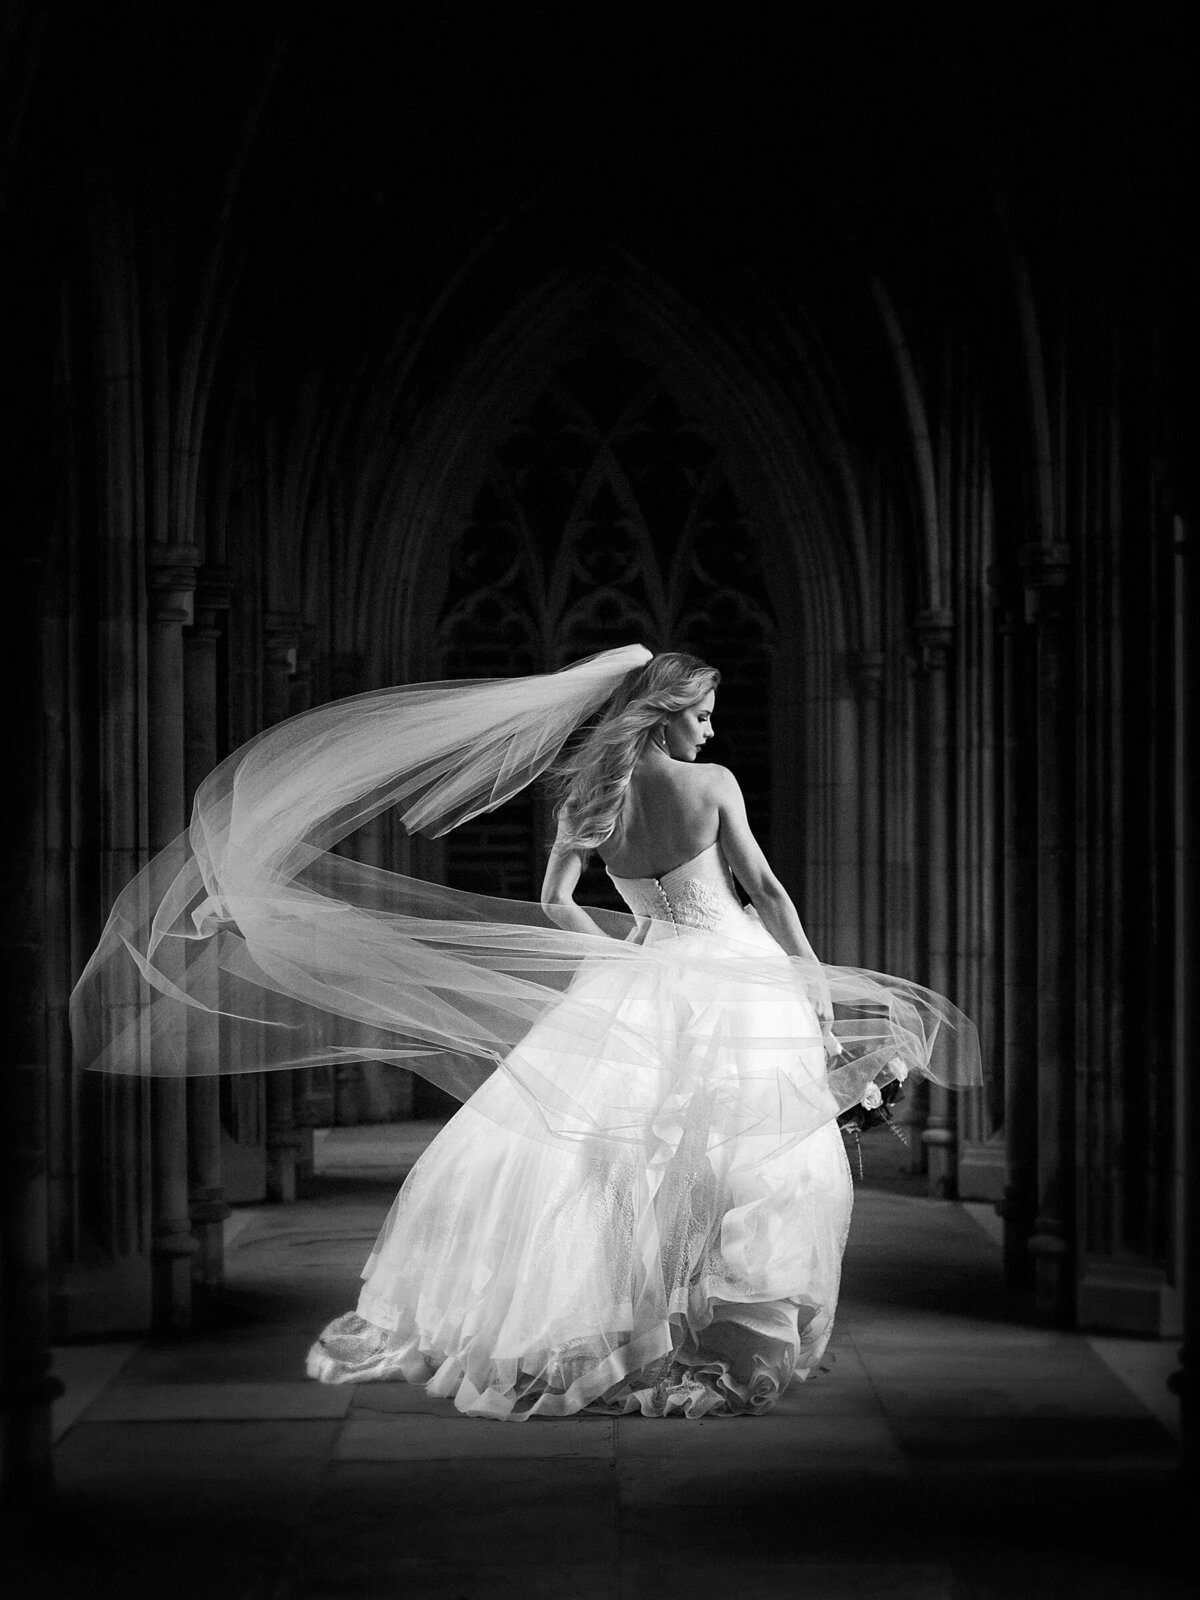 Dramatic black and white image of a bride with her veil flowing around her in the gothic architecture of Duke Chapel's arcades